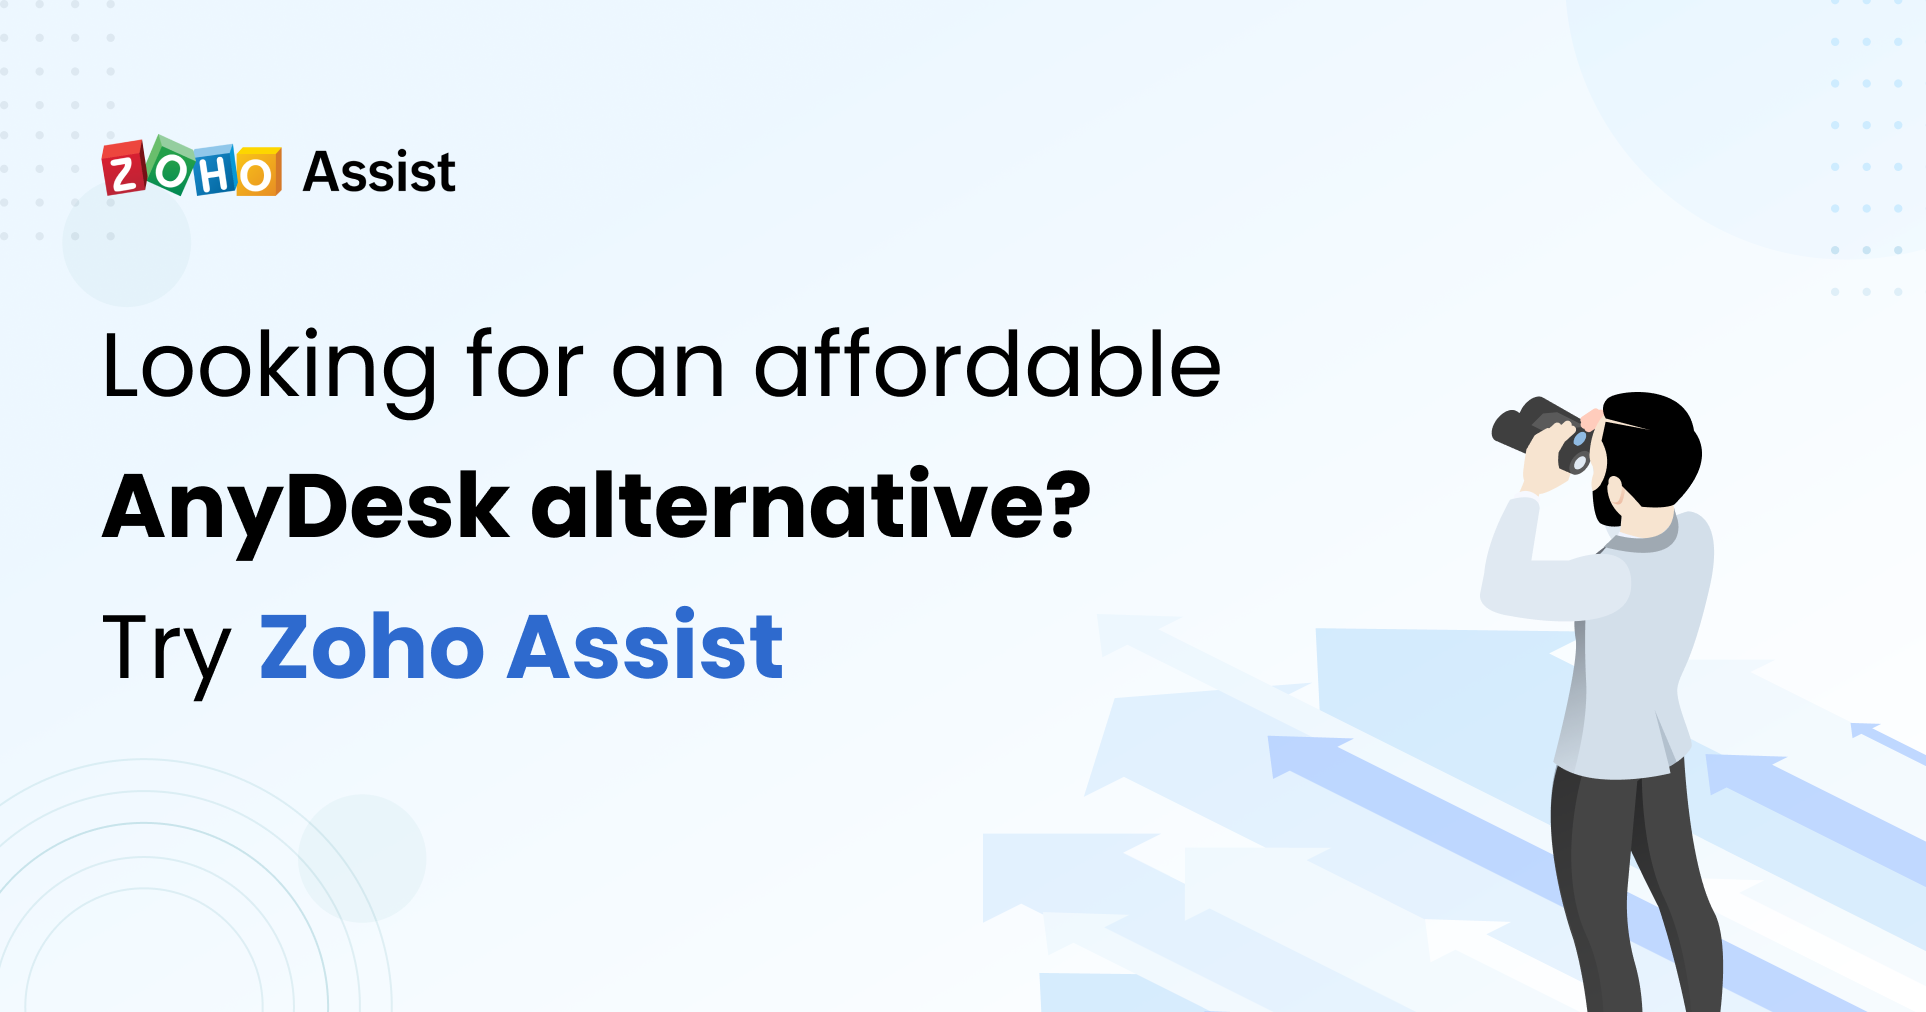 Zoho Assist: An effective and affordable AnyDesk alternative